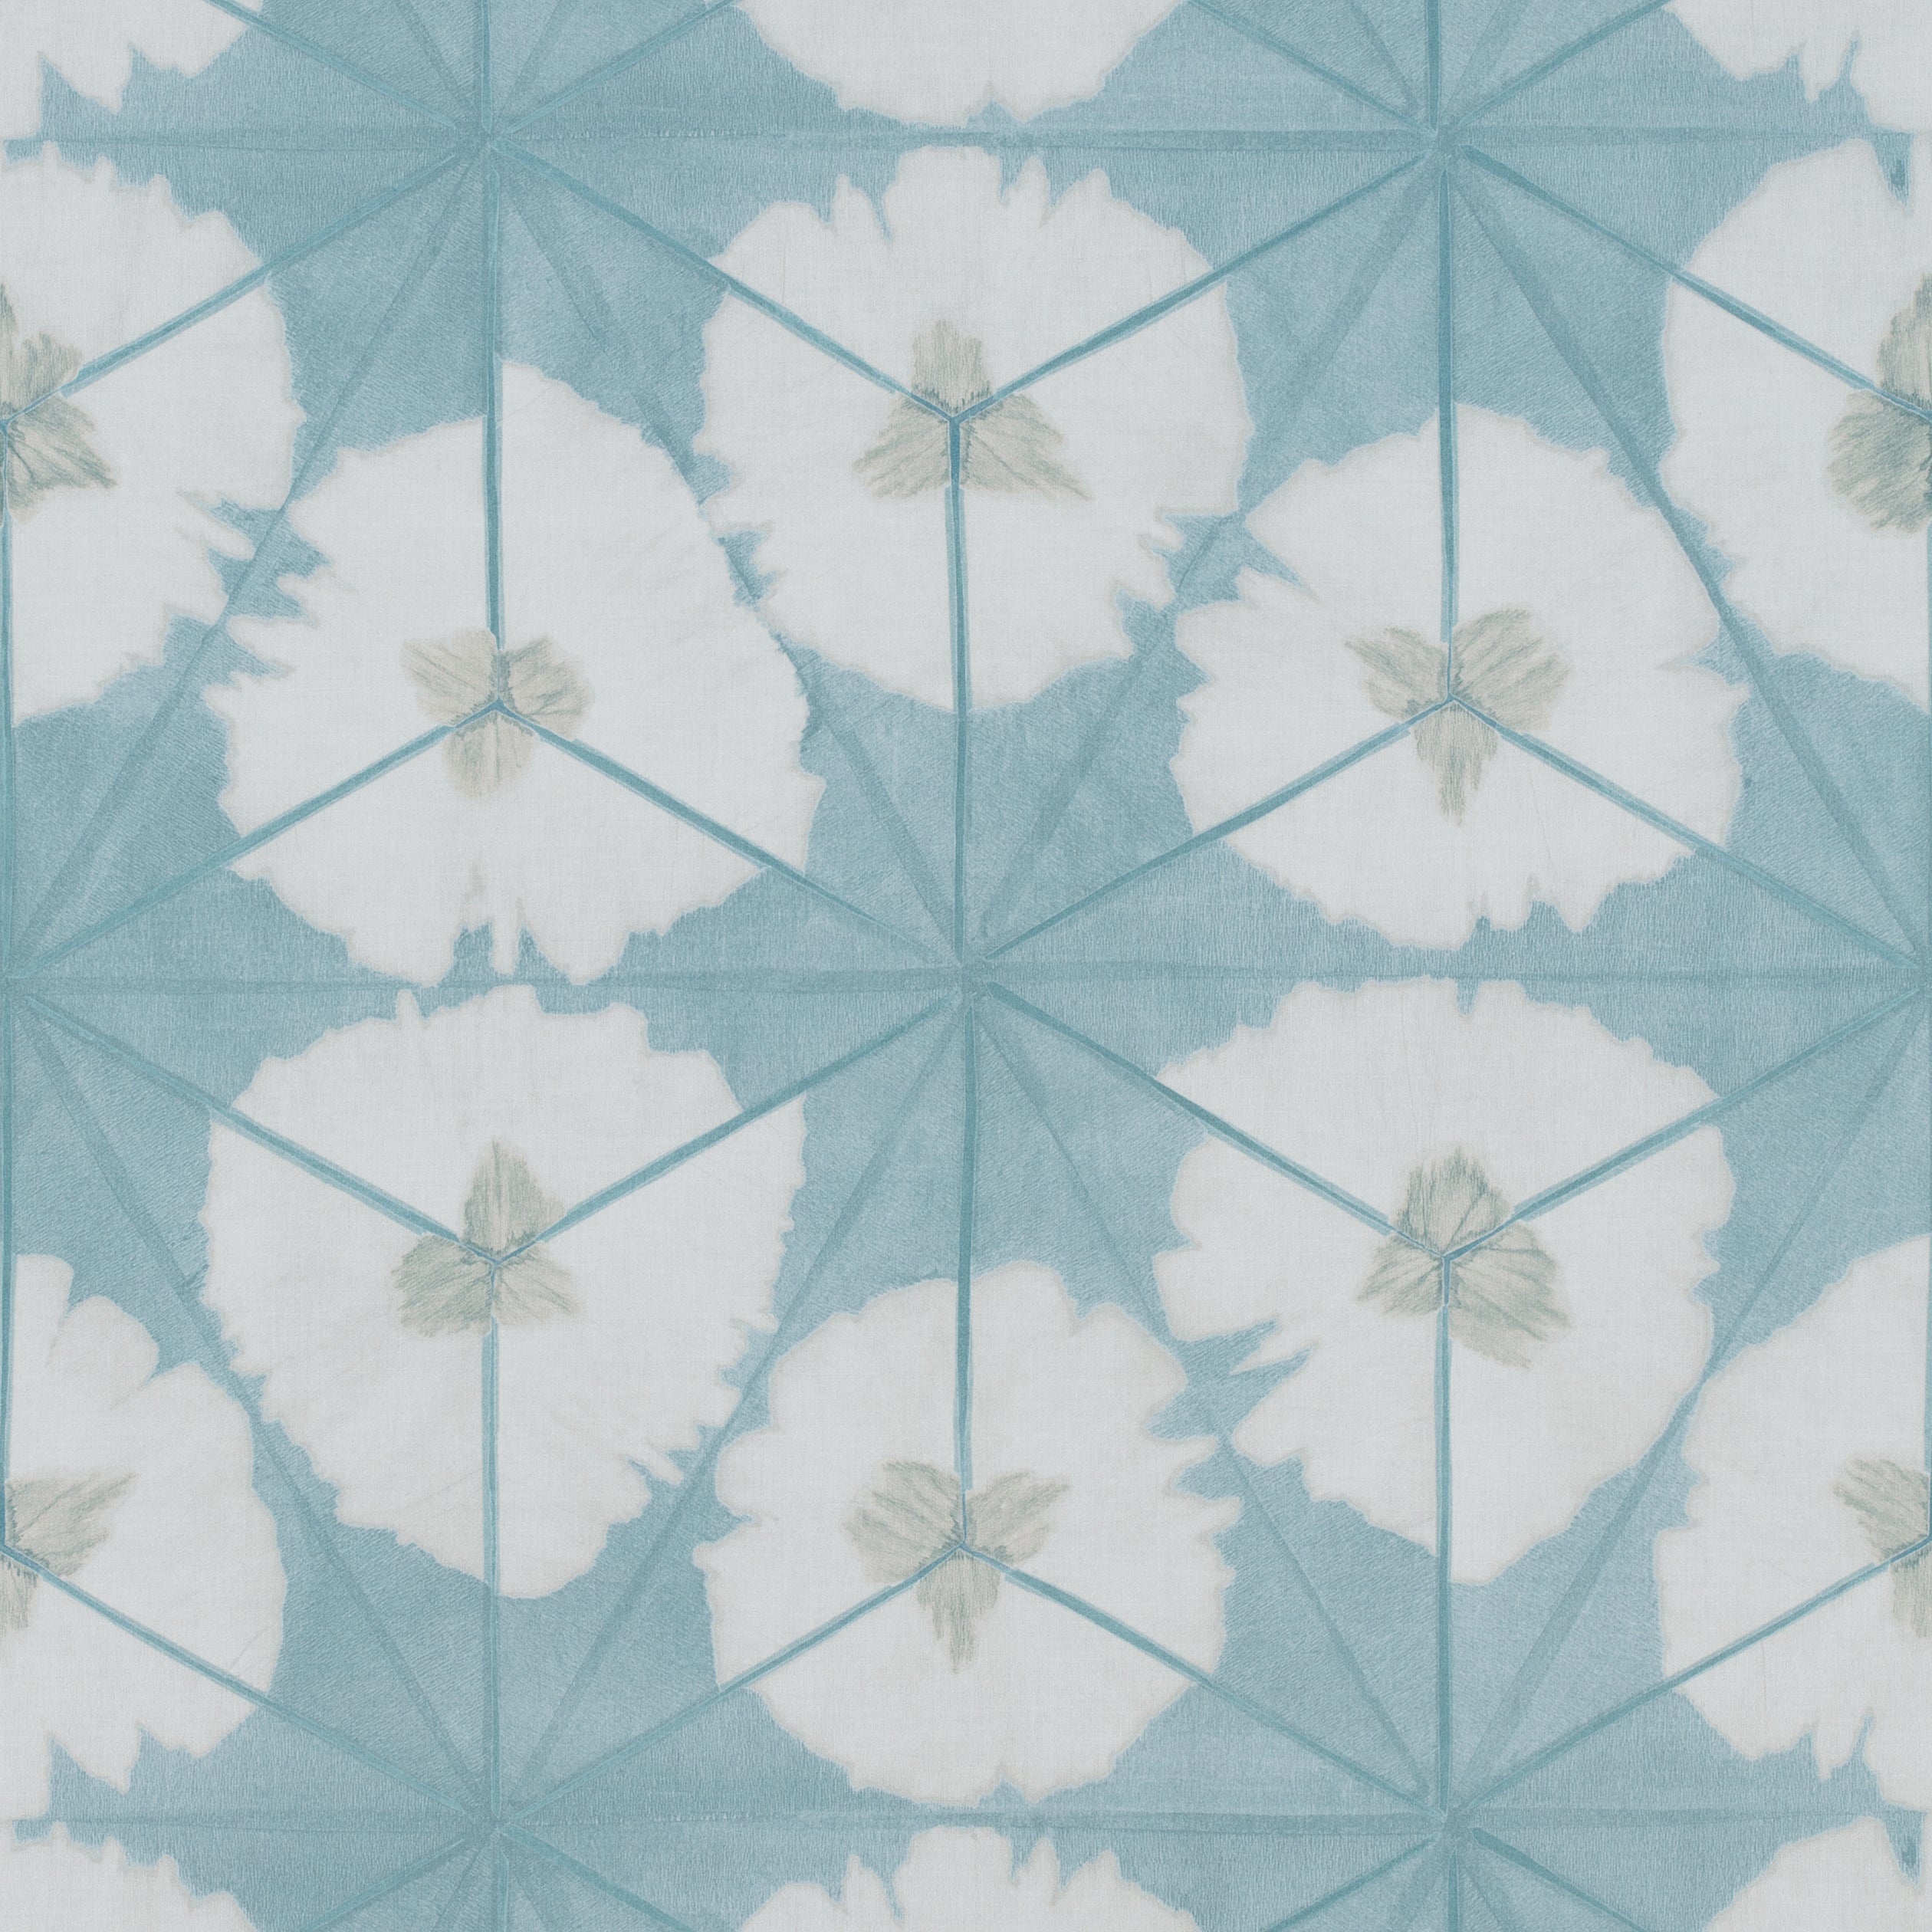 Sunburst fabric in aqua color - pattern number F913091 - by Thibaut in the Summer House collection